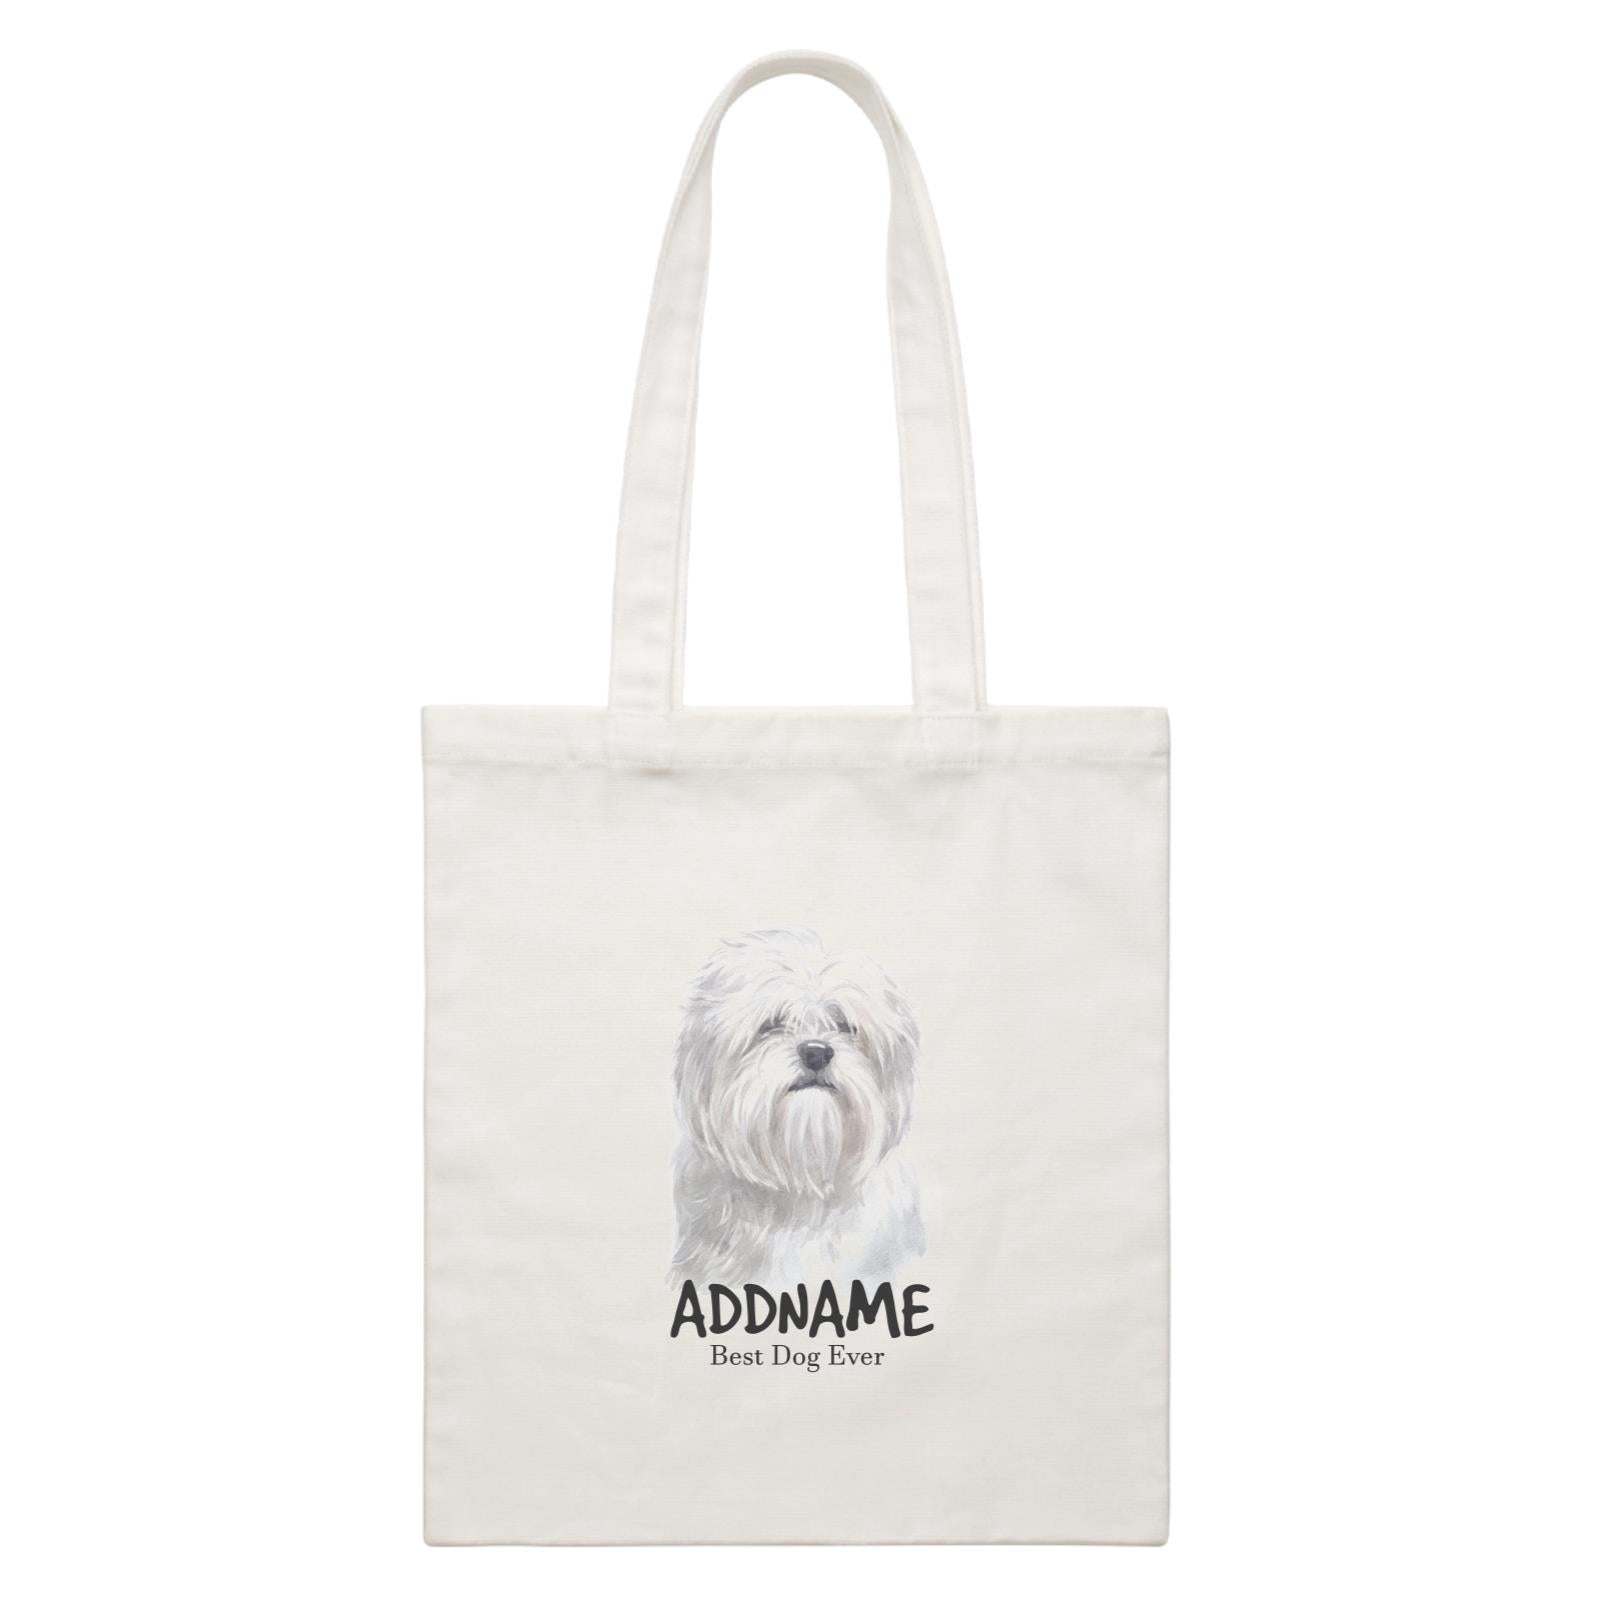 Watercolor Dog Lhasa Apso Best Dog Ever Addname White Canvas Bag